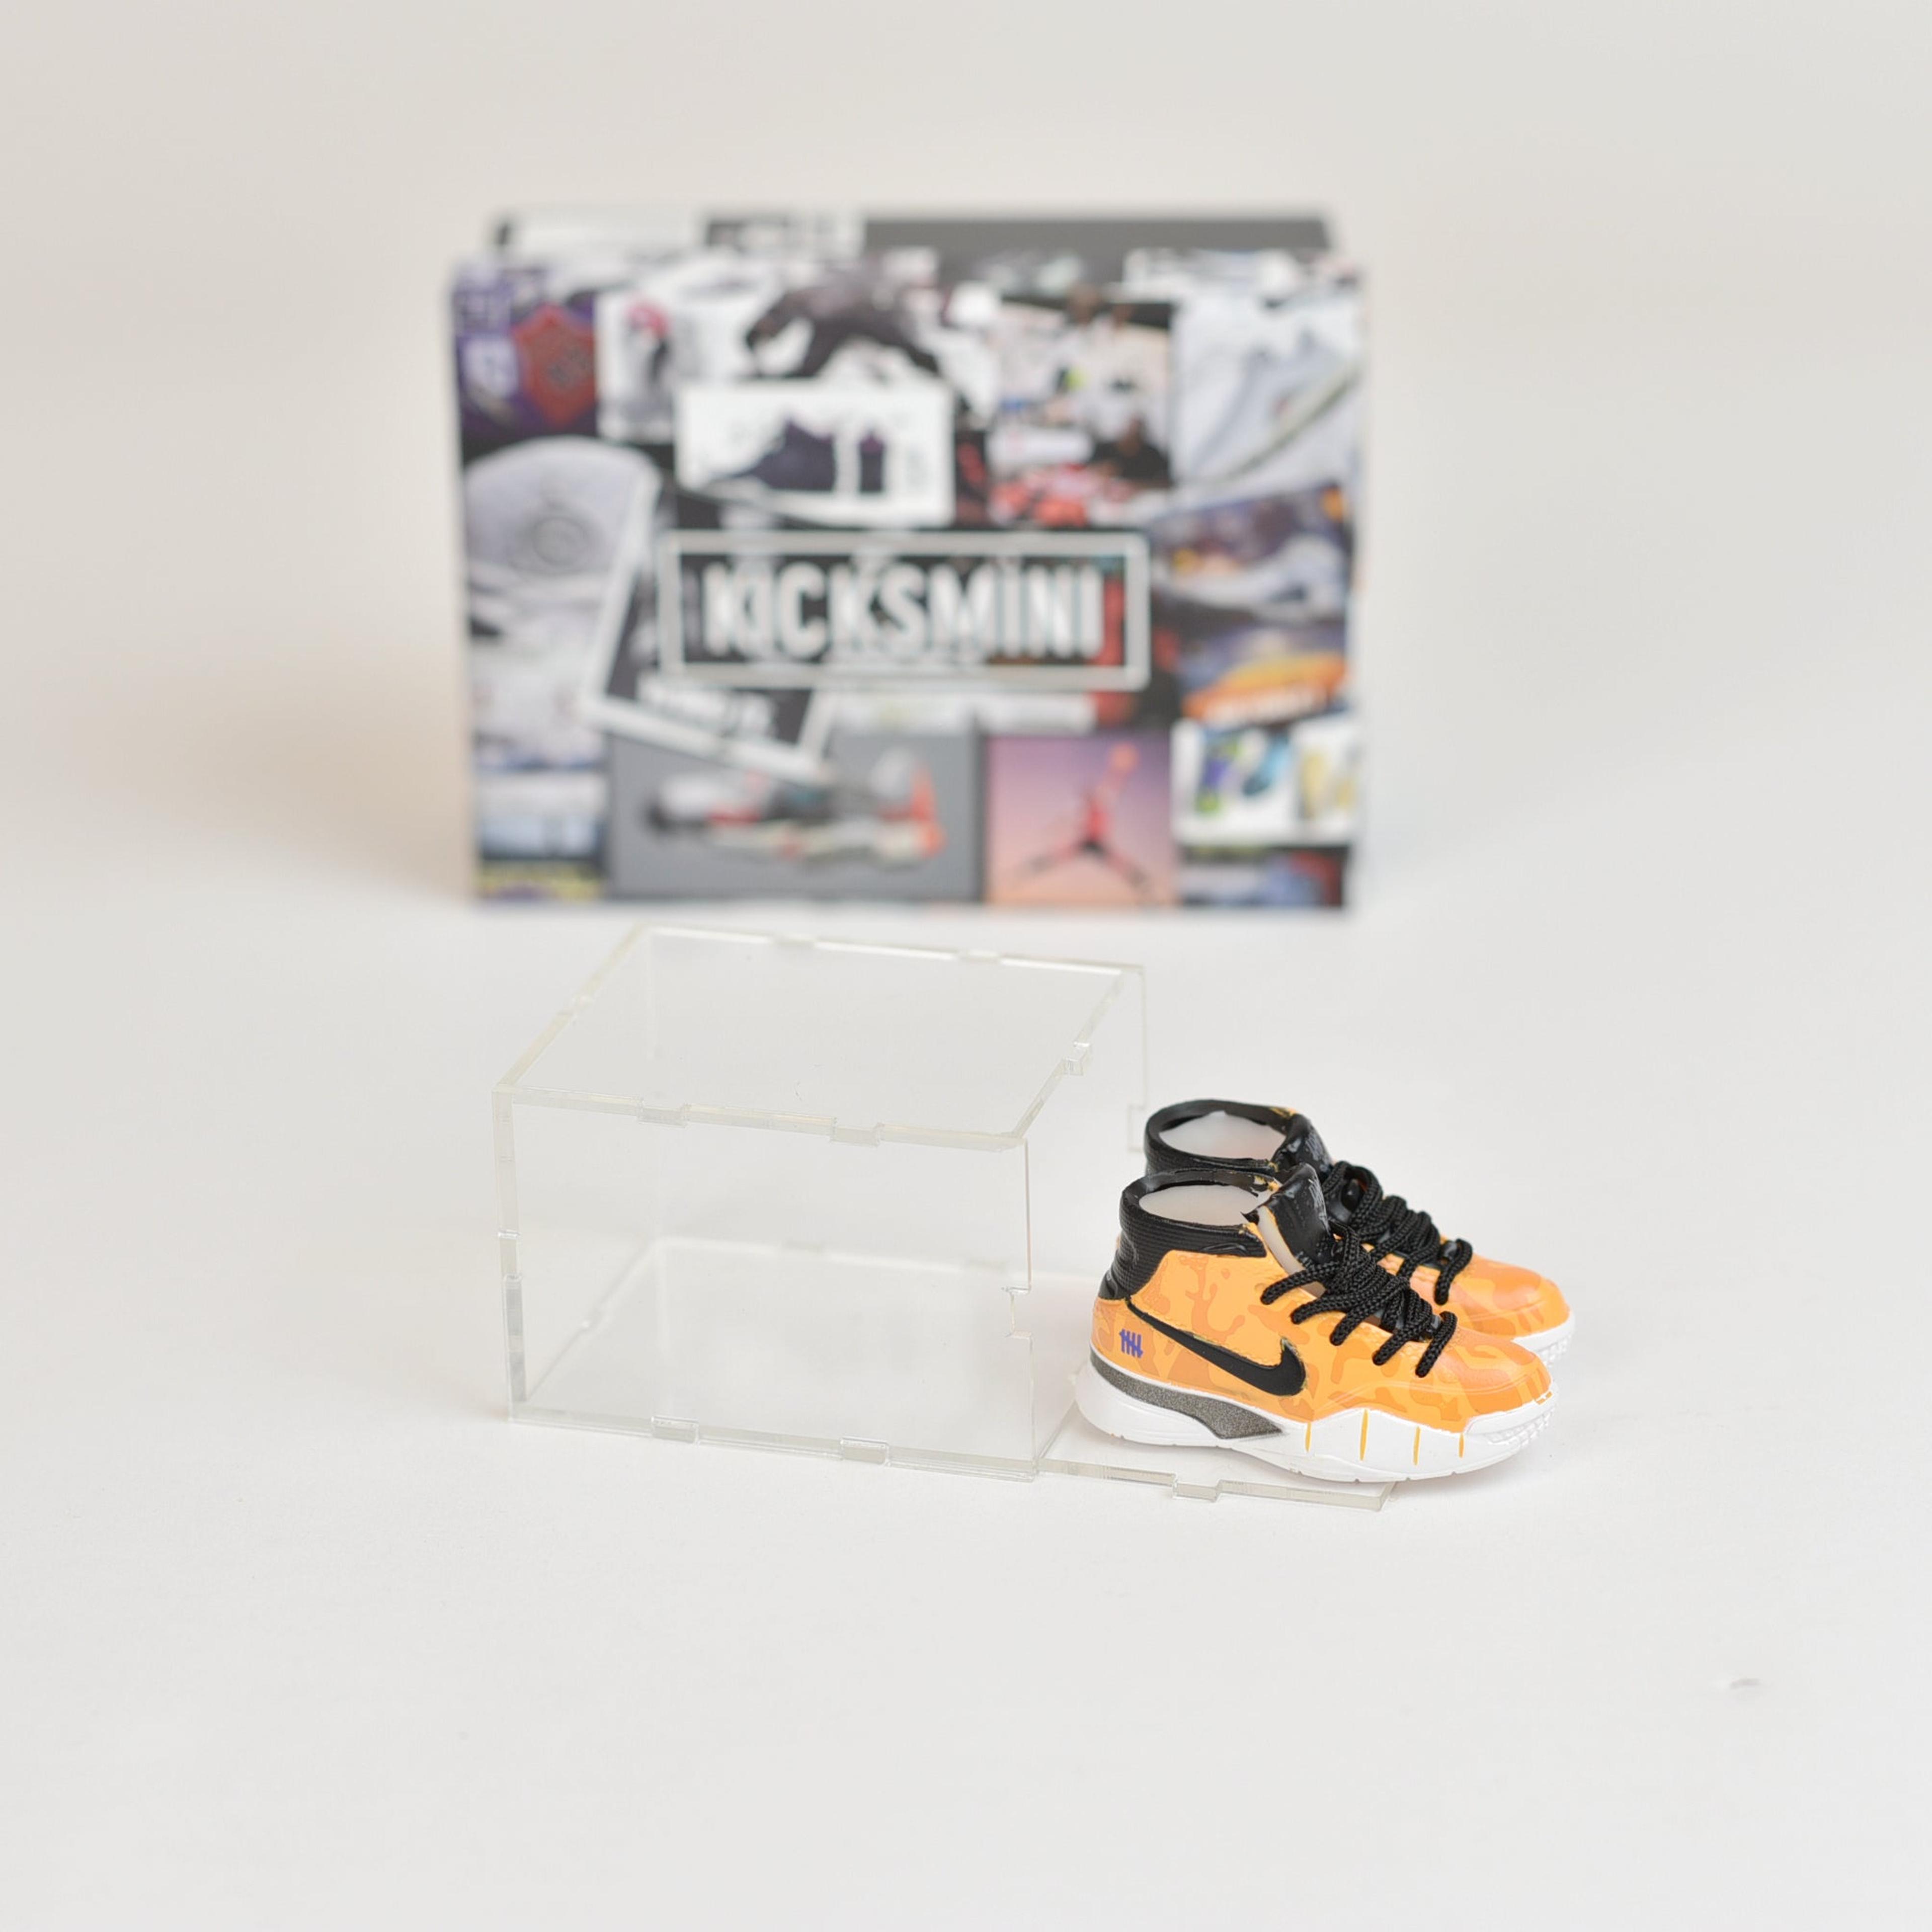 Alternate View 17 of Kobe Bryant/LeBron James/Steph Curry Mini Sneaker Collection wit